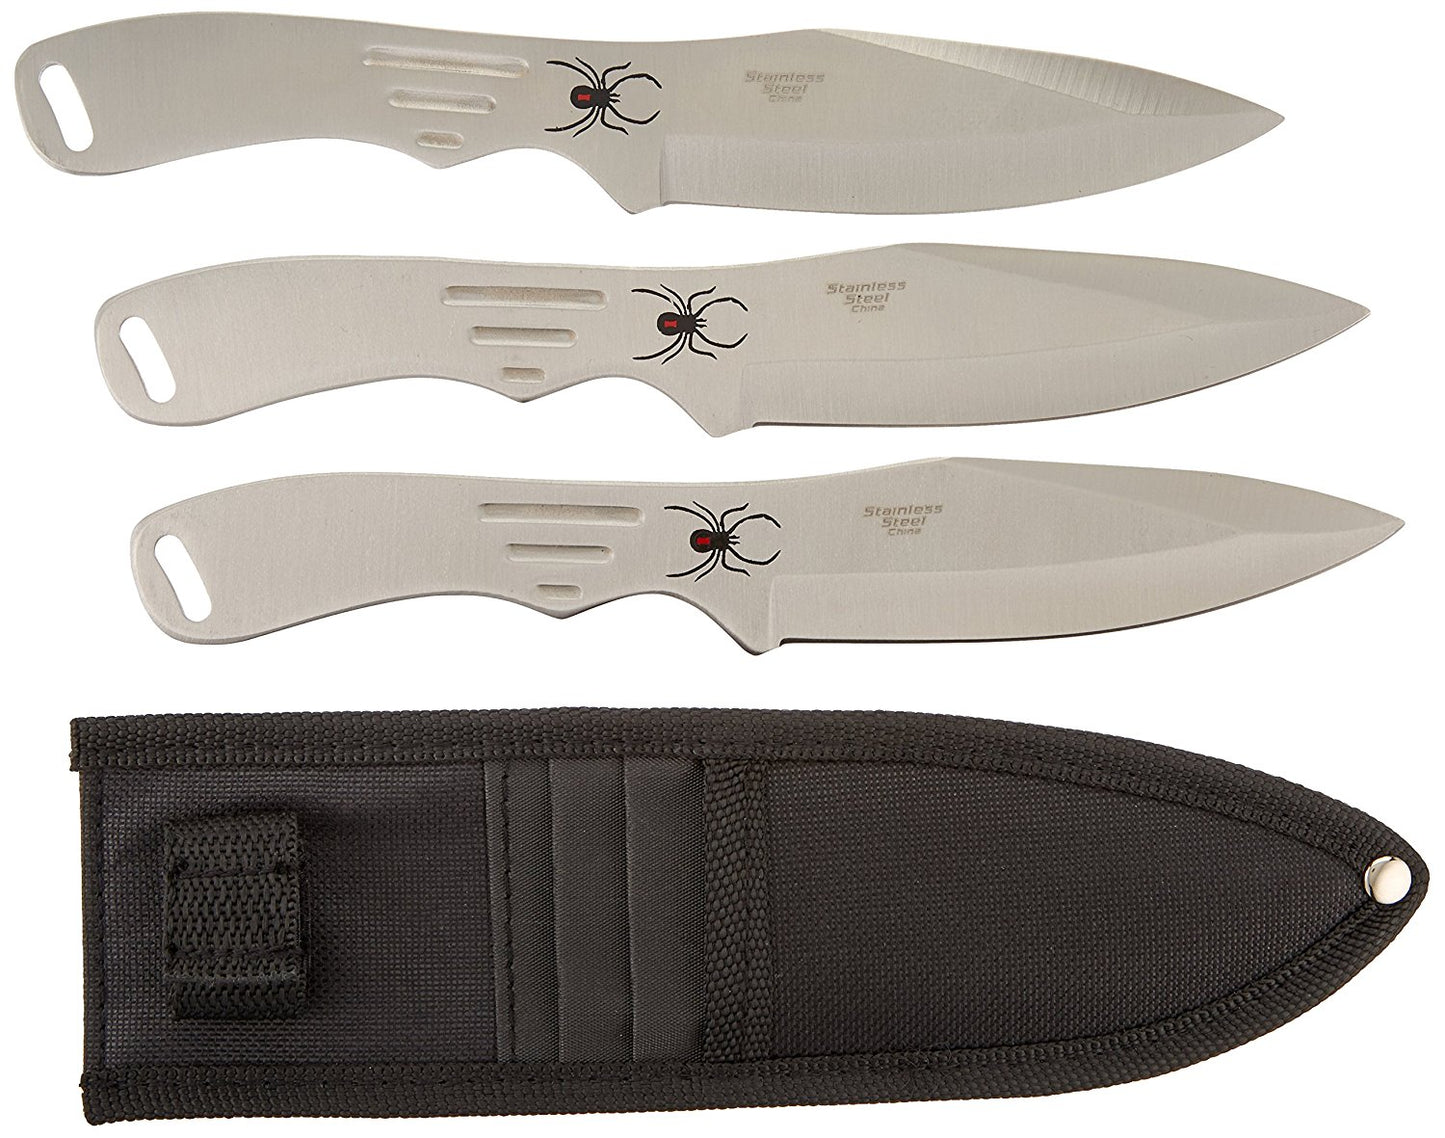 Perfect Point RC-179 Series Throwing Knife Set with Three Knives, Steel Handles, 8-Inch Overall